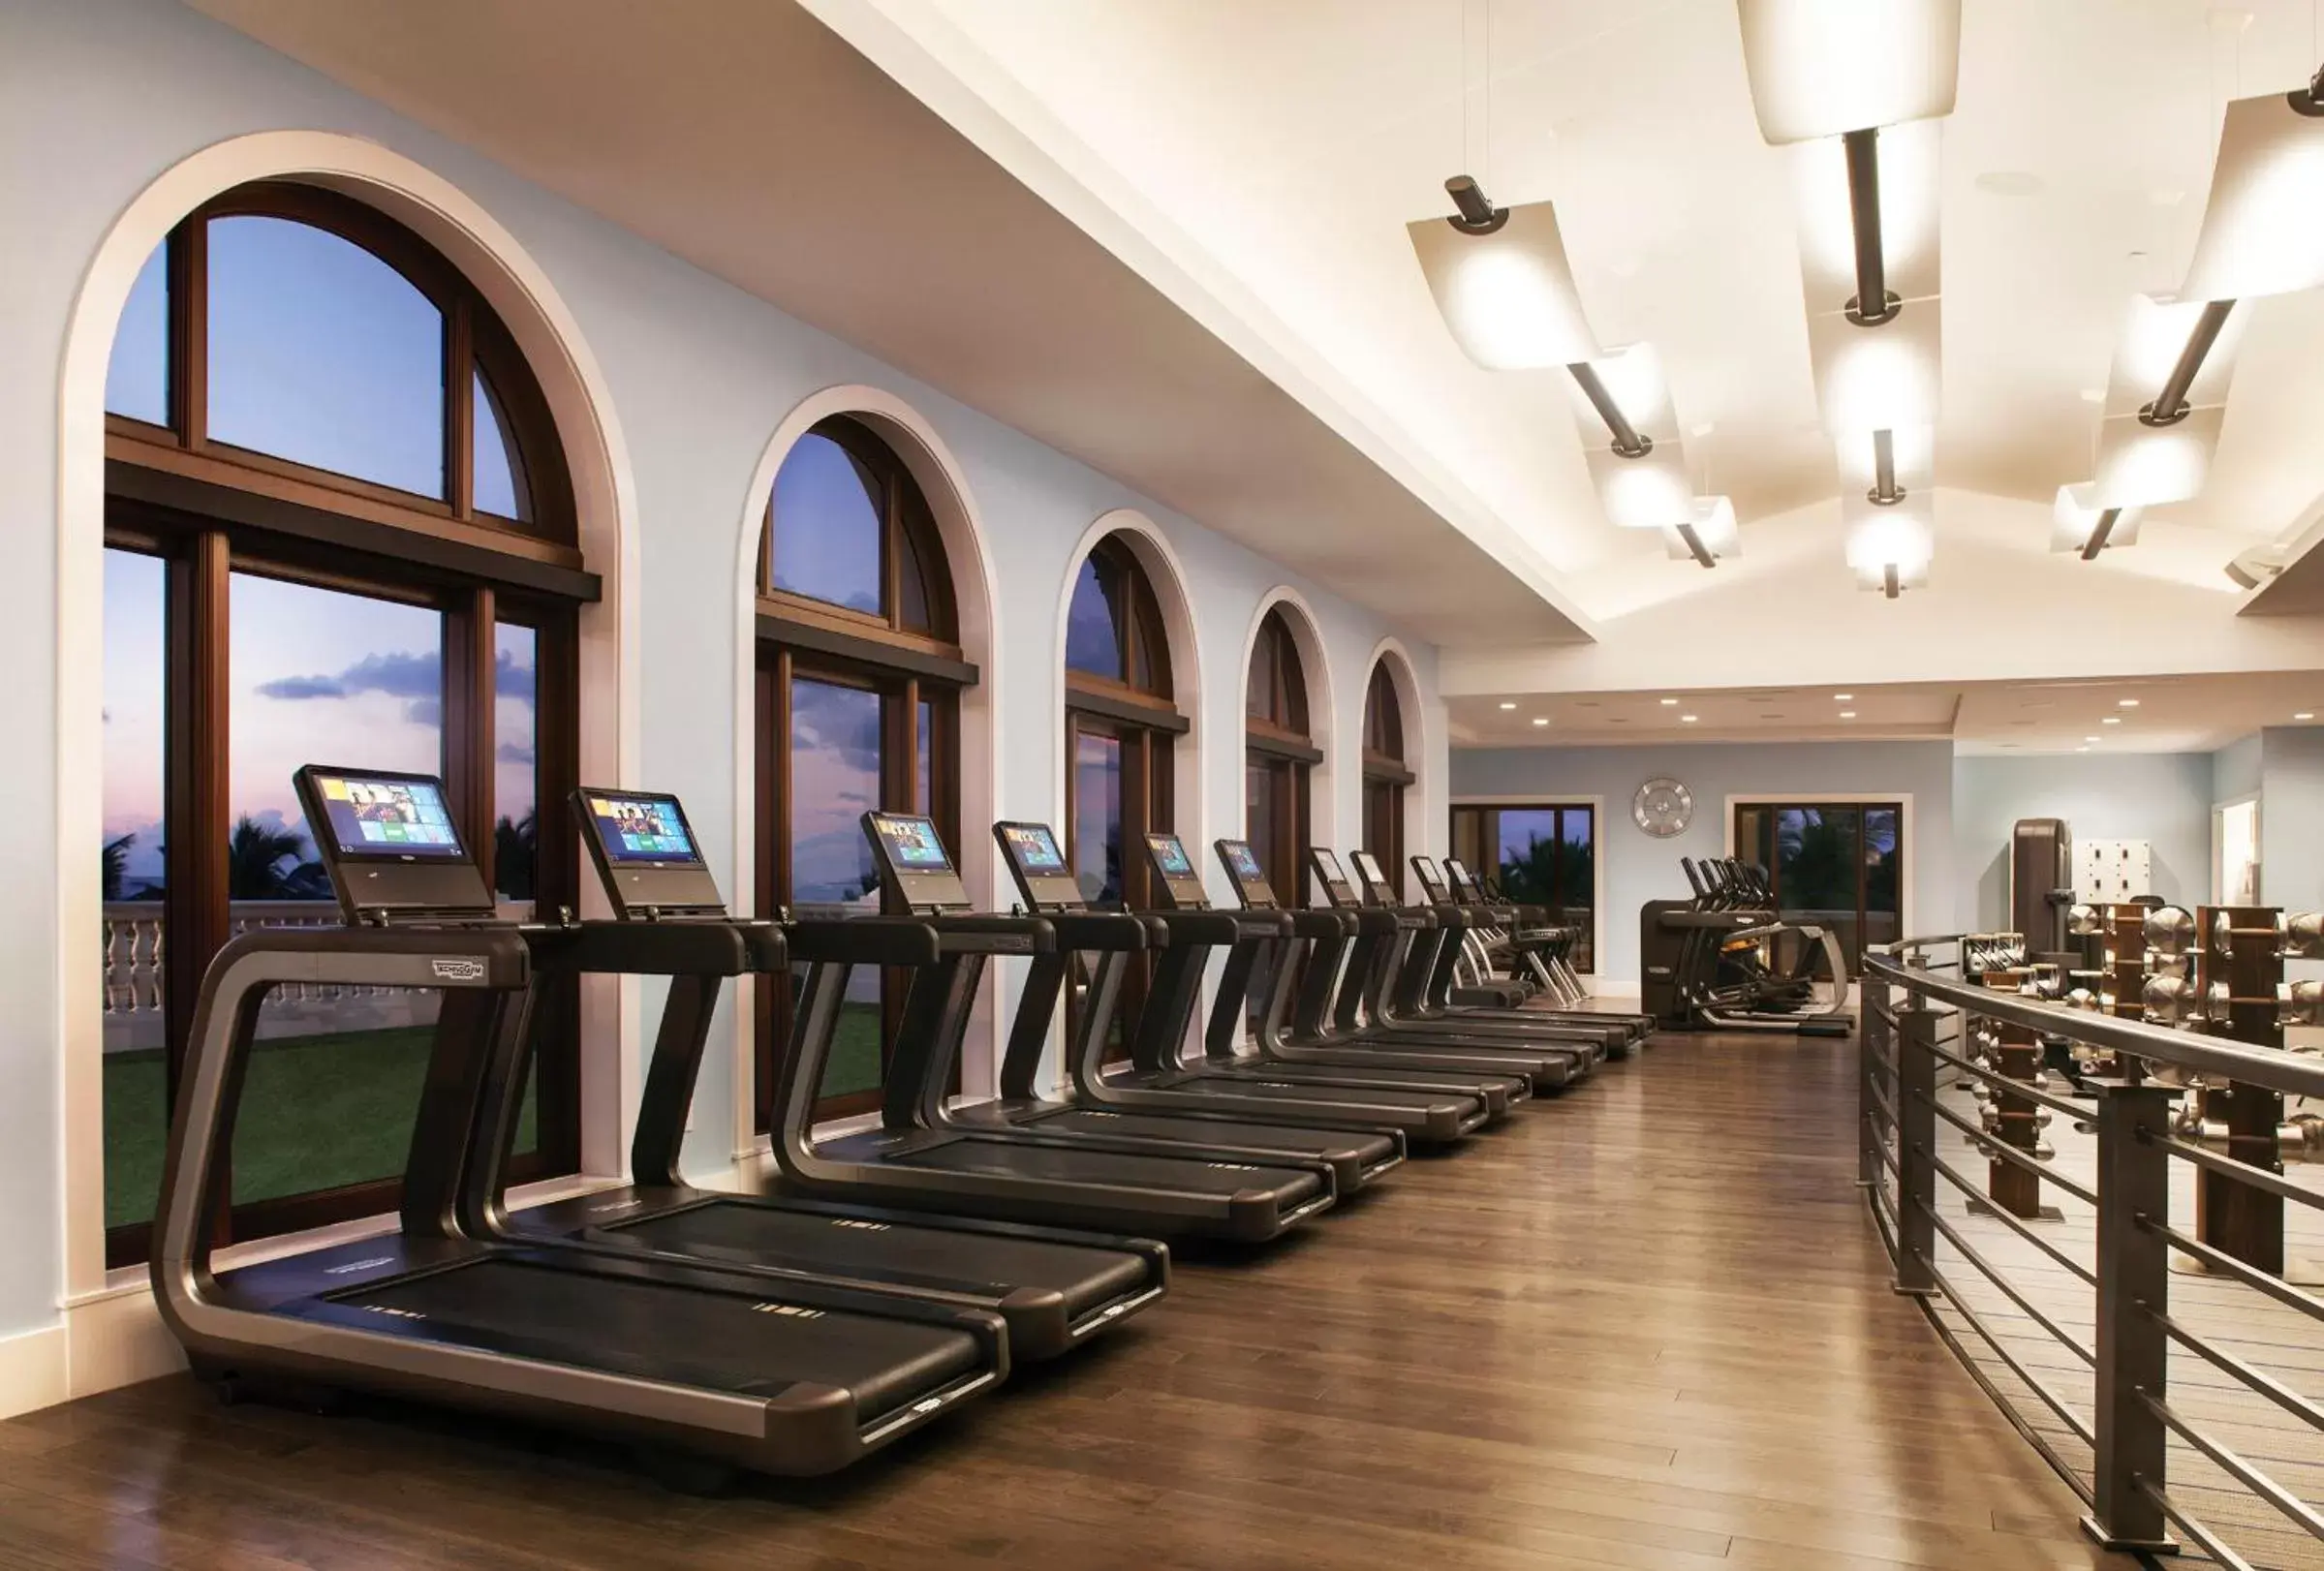 Fitness centre/facilities, Fitness Center/Facilities in The Breakers Palm Beach